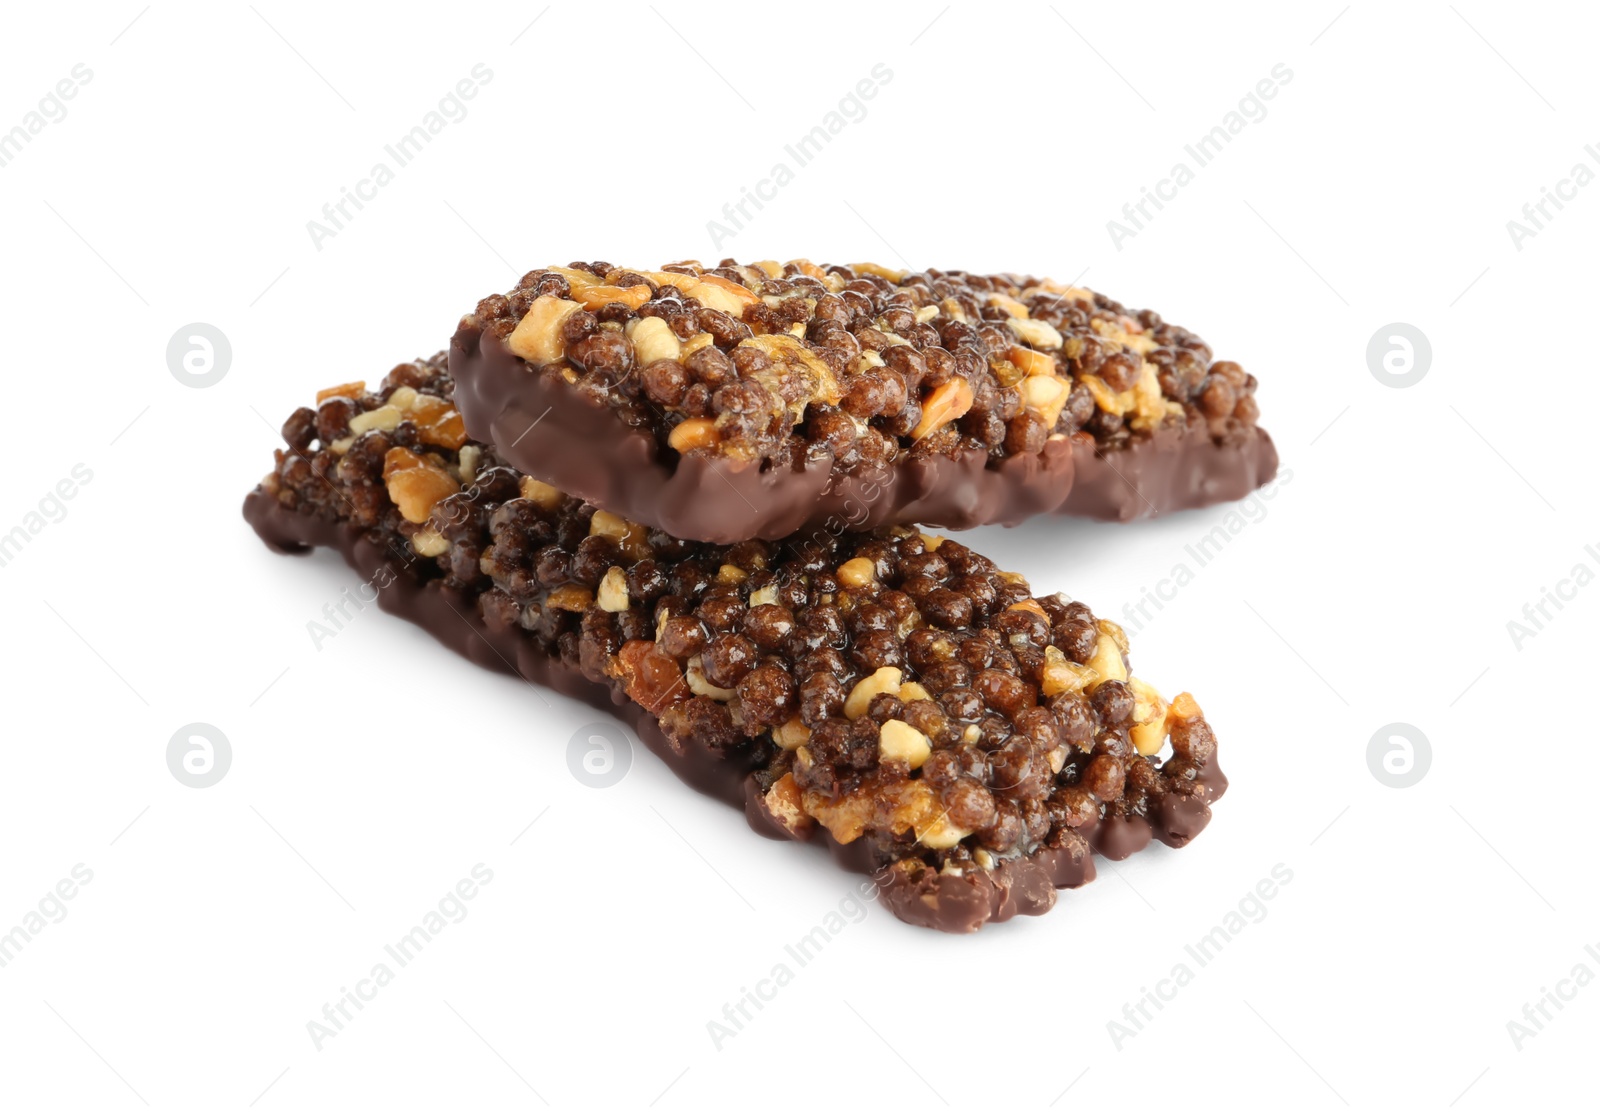 Photo of Protein bars with chocolate on white background. Healthy snack